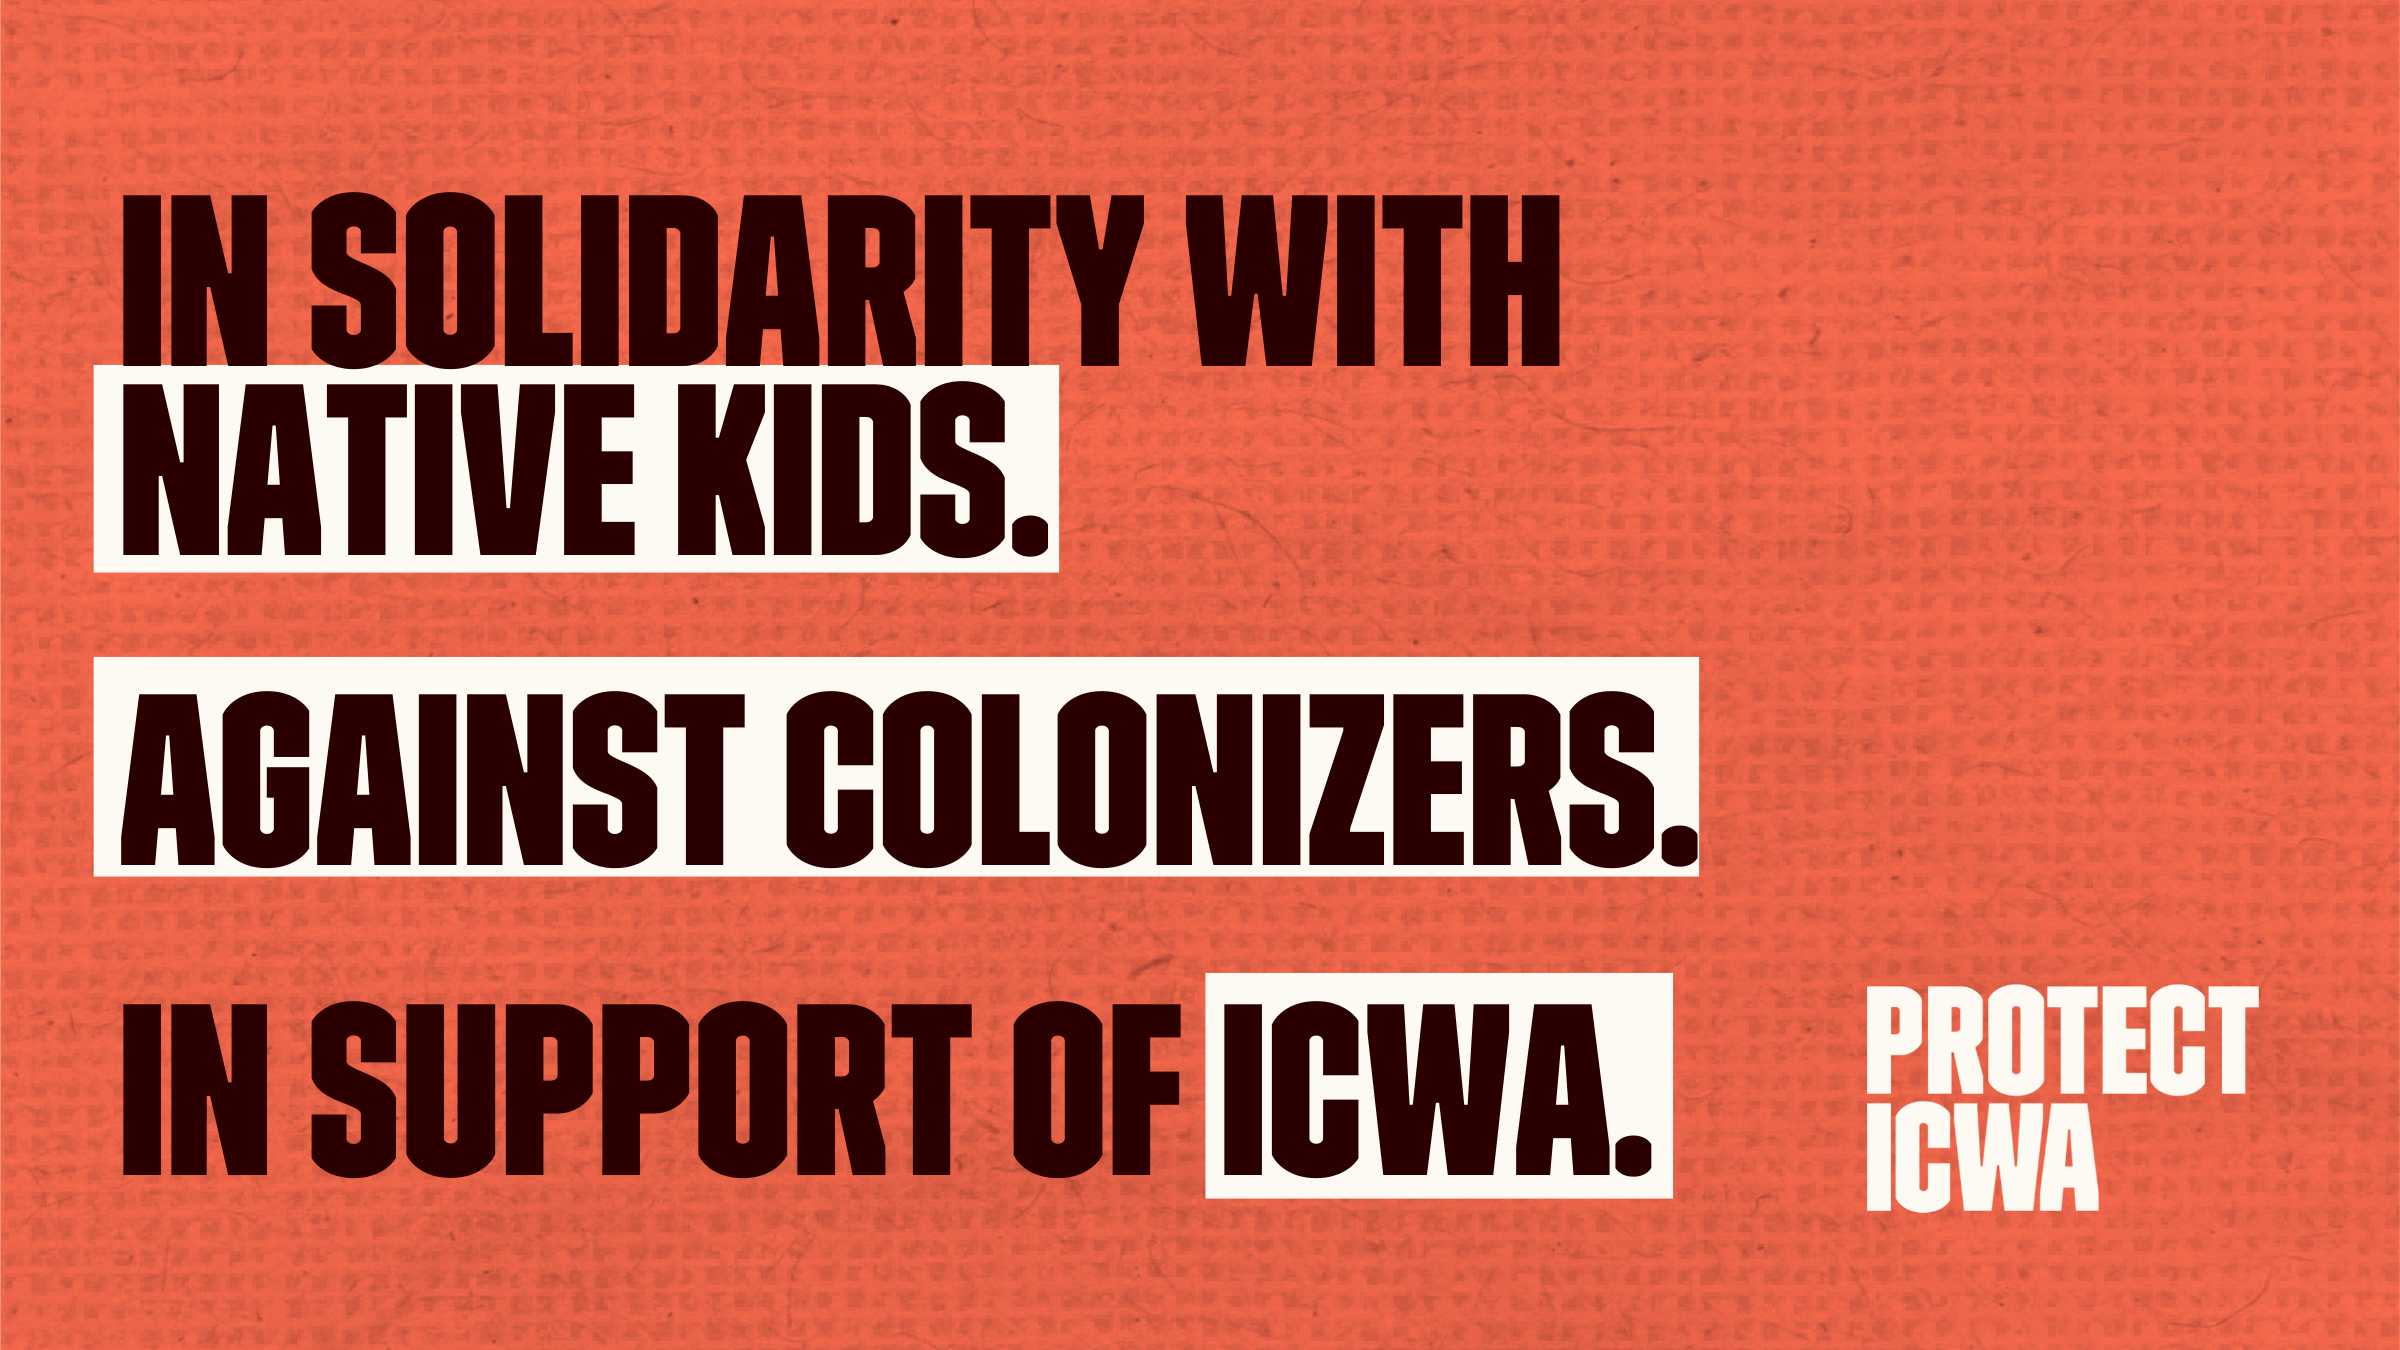 In solidarity with Native kids against colonizers and in support of ICWA. By @ProtectICWA